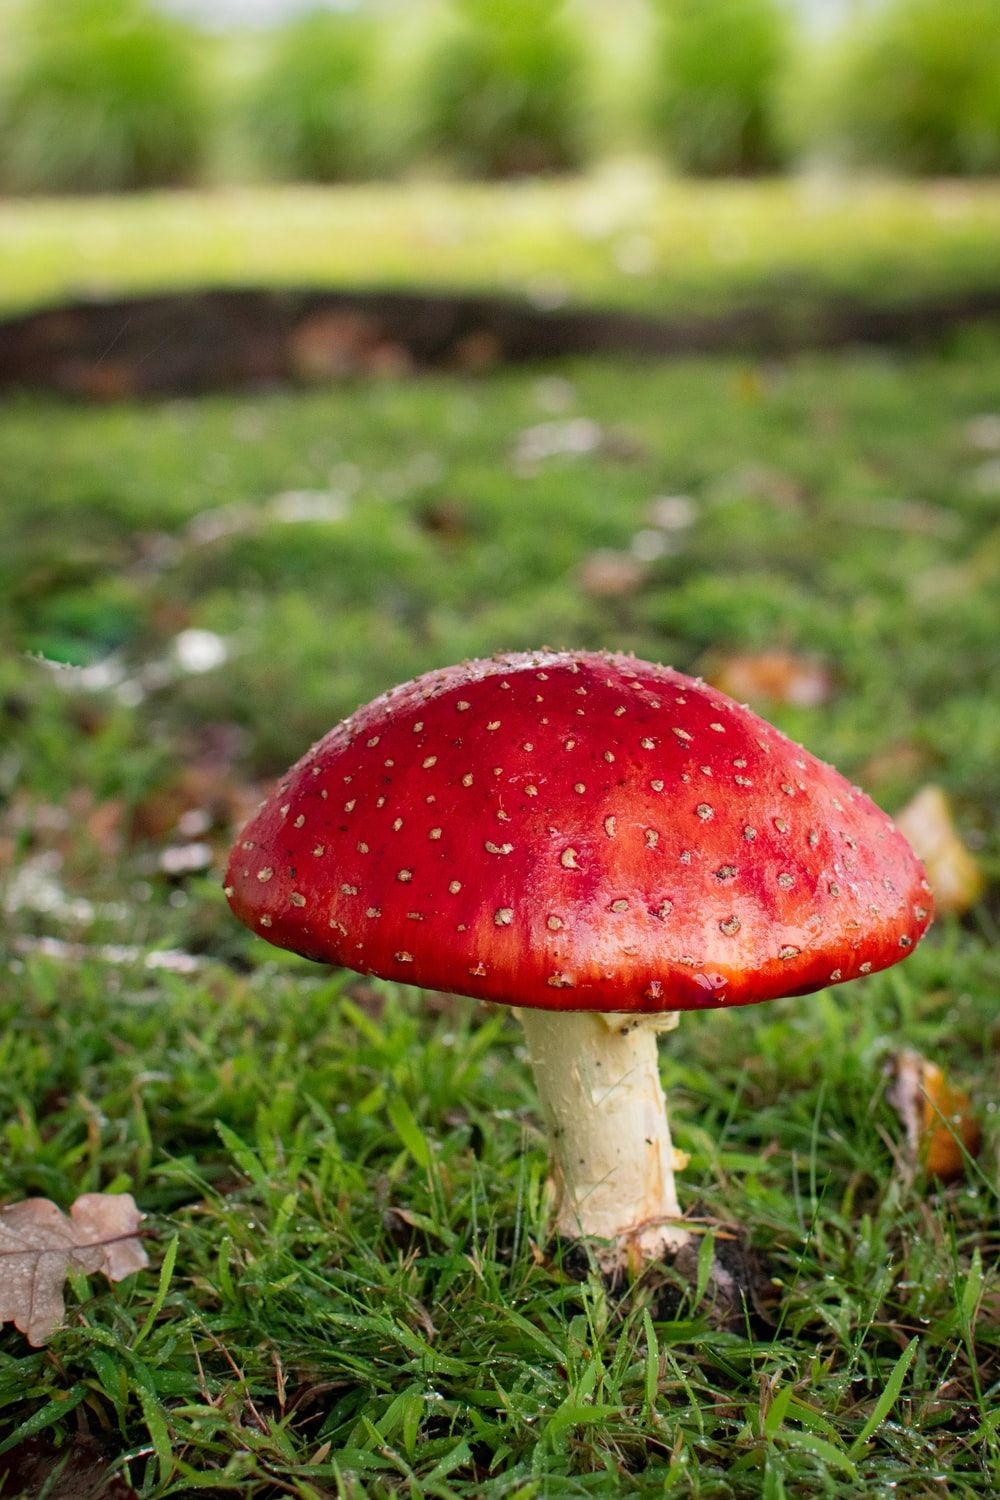 Look for a Magic mushrooms detriot sale depending on where you’re staying or where you live